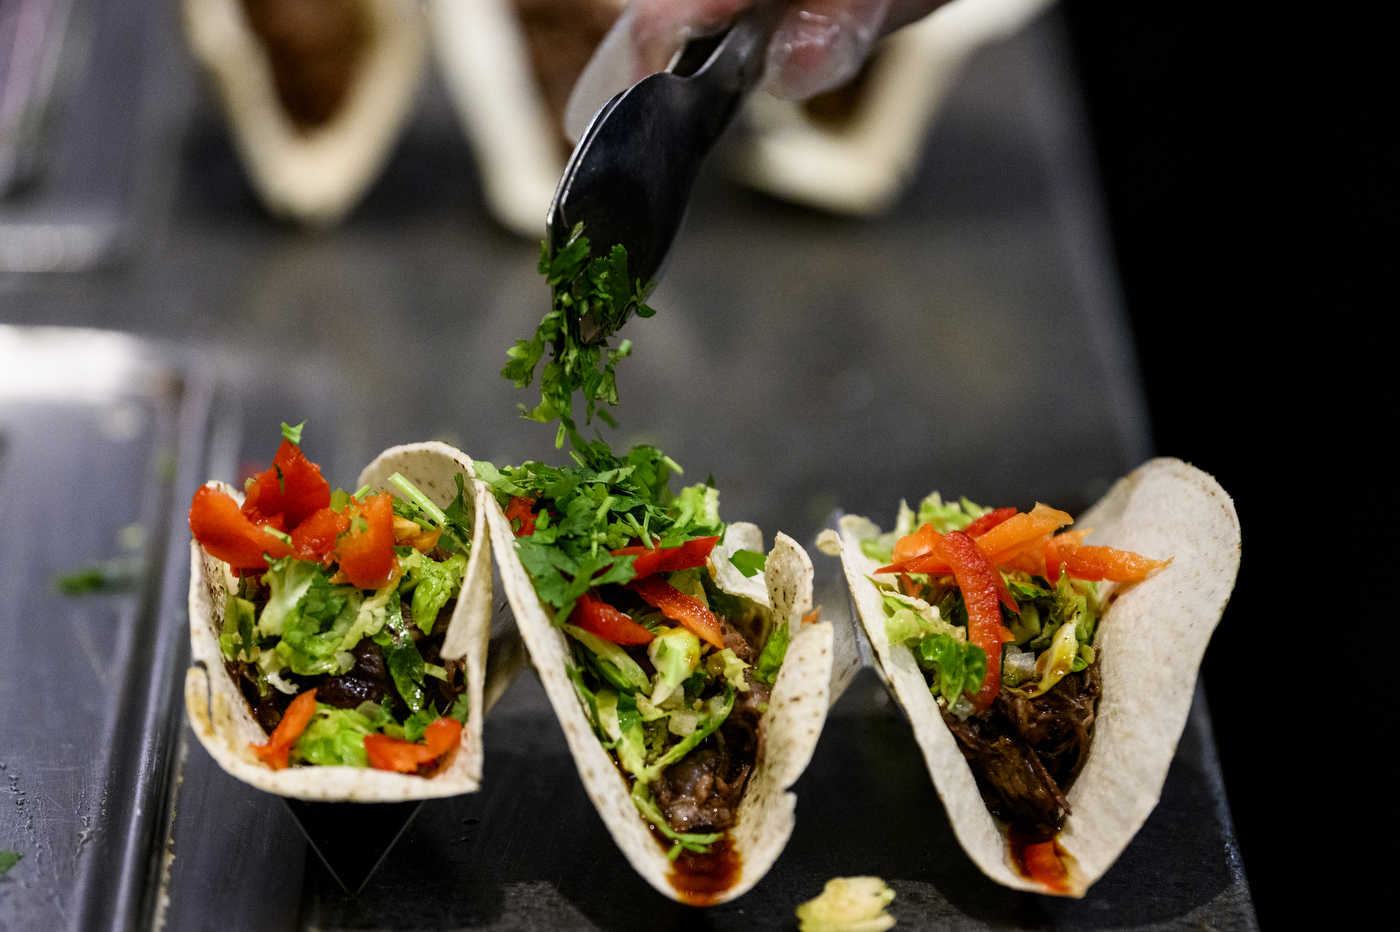 three tacos being garnished with chopped greens